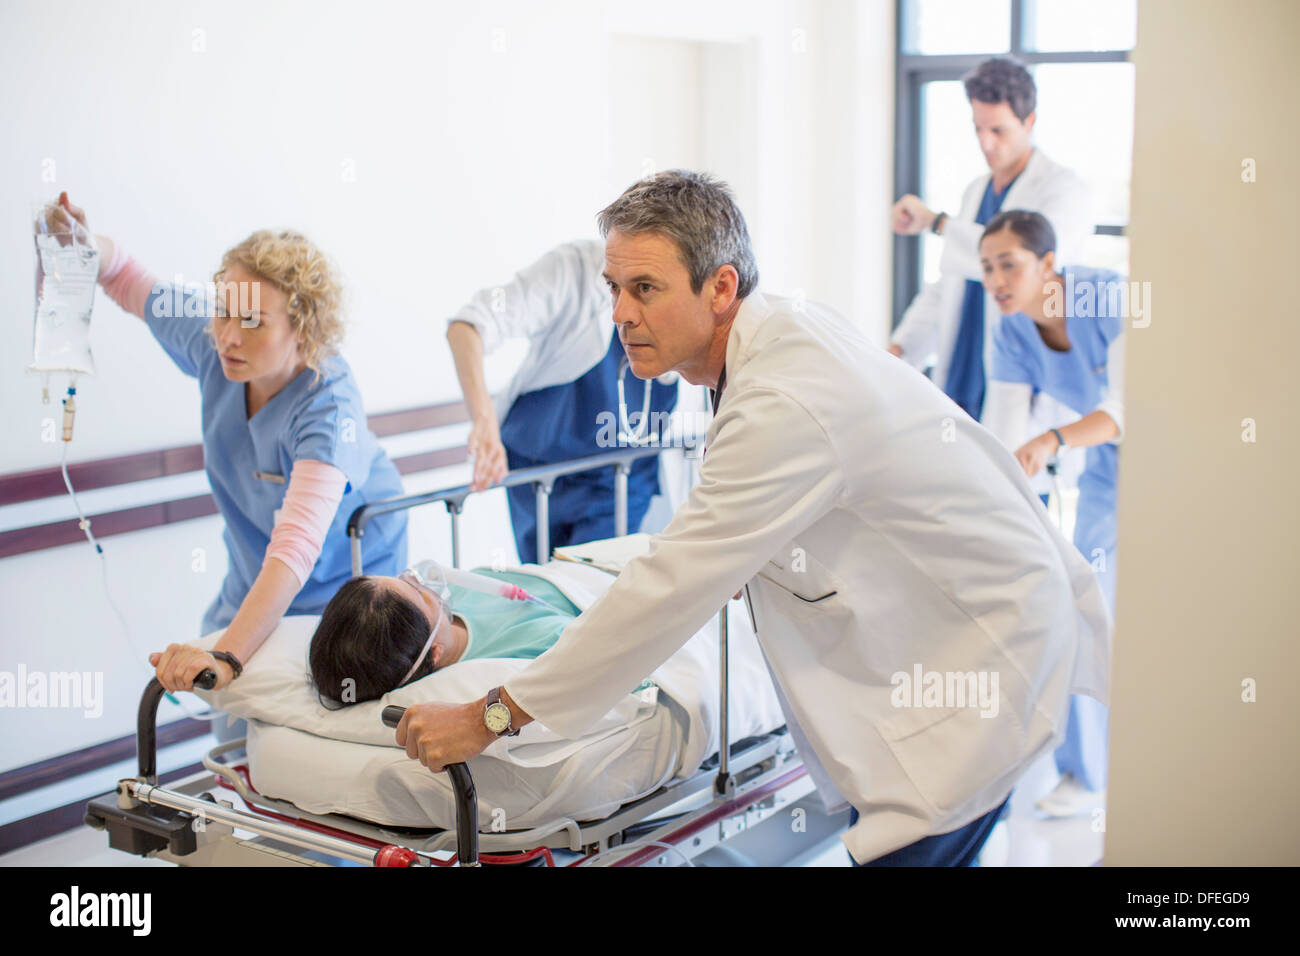 Doctors rushing patient on stretcher down hospital corridor Banque D'Images